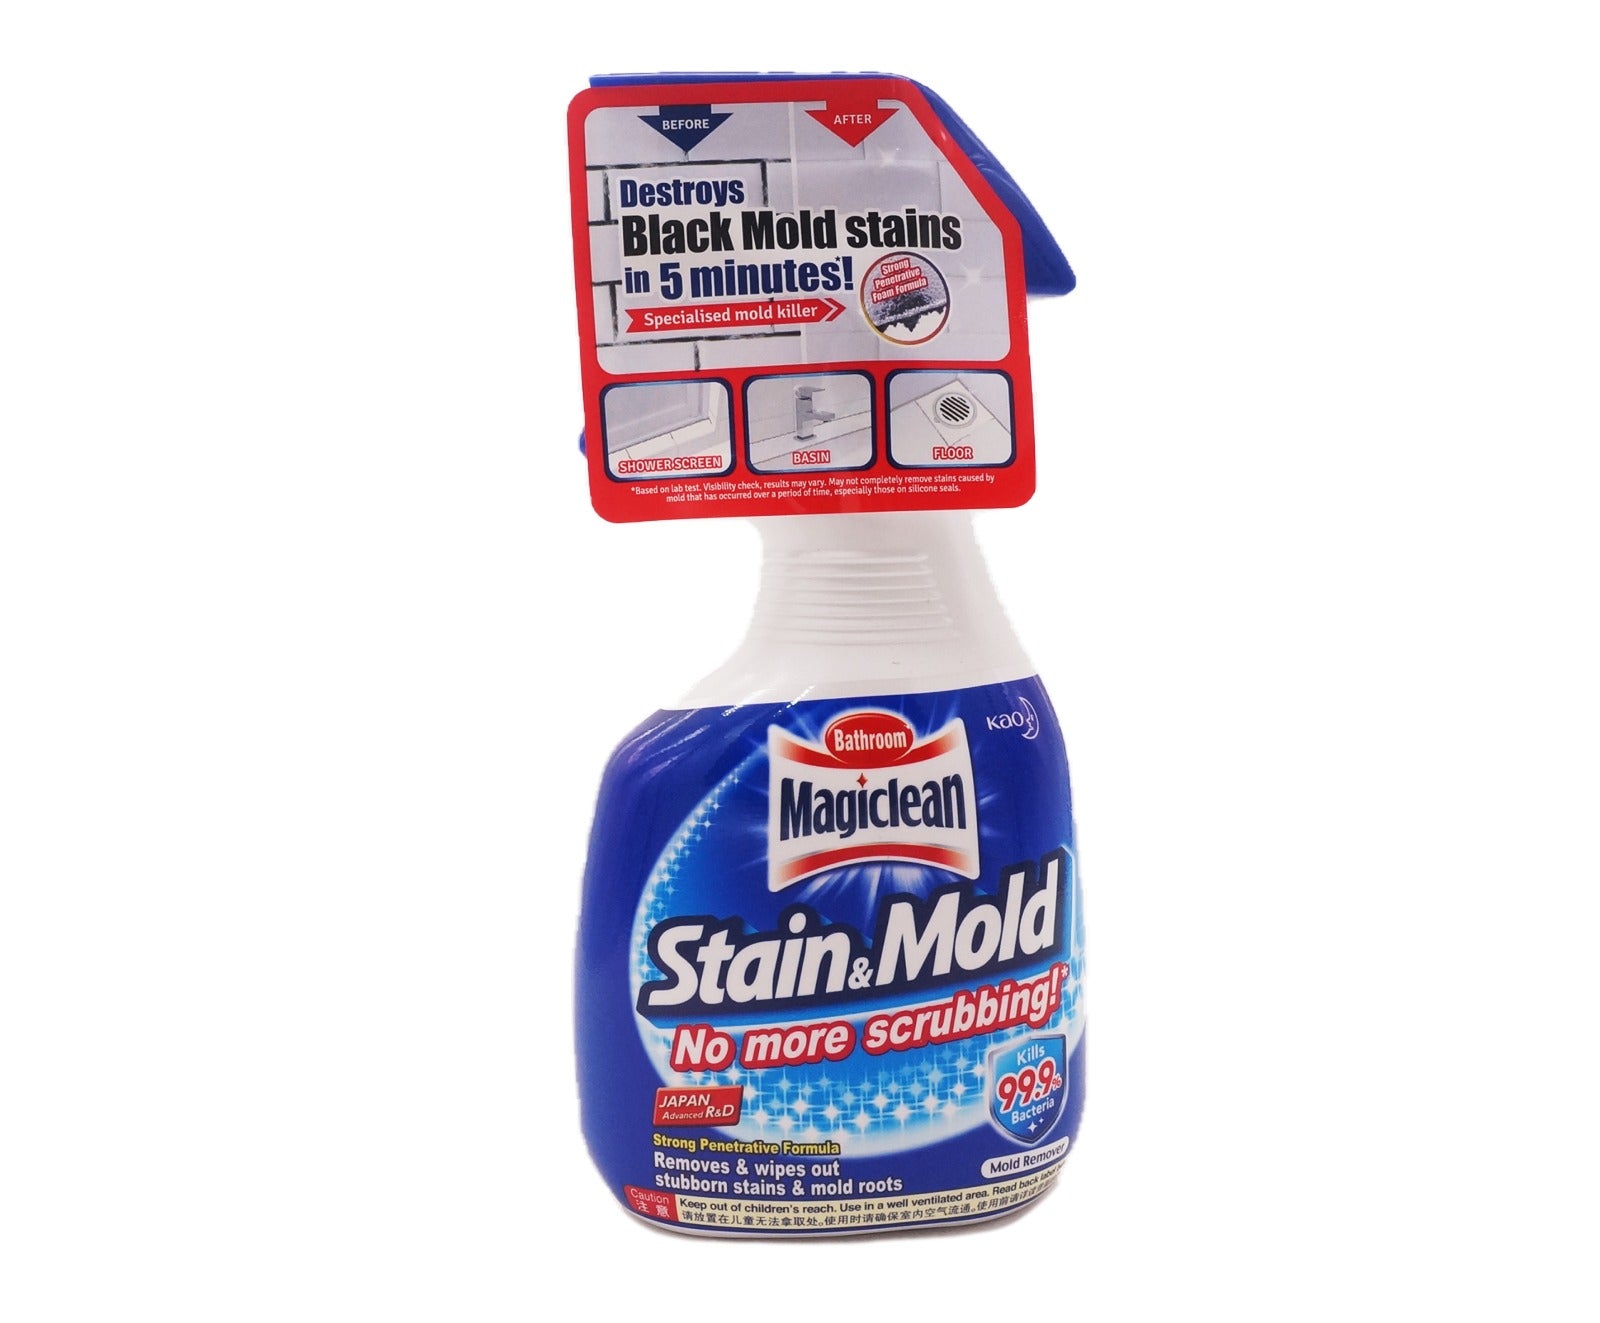 Magiclean Bathroom Stain & Mold Remover Trigger (400ml – Piece)